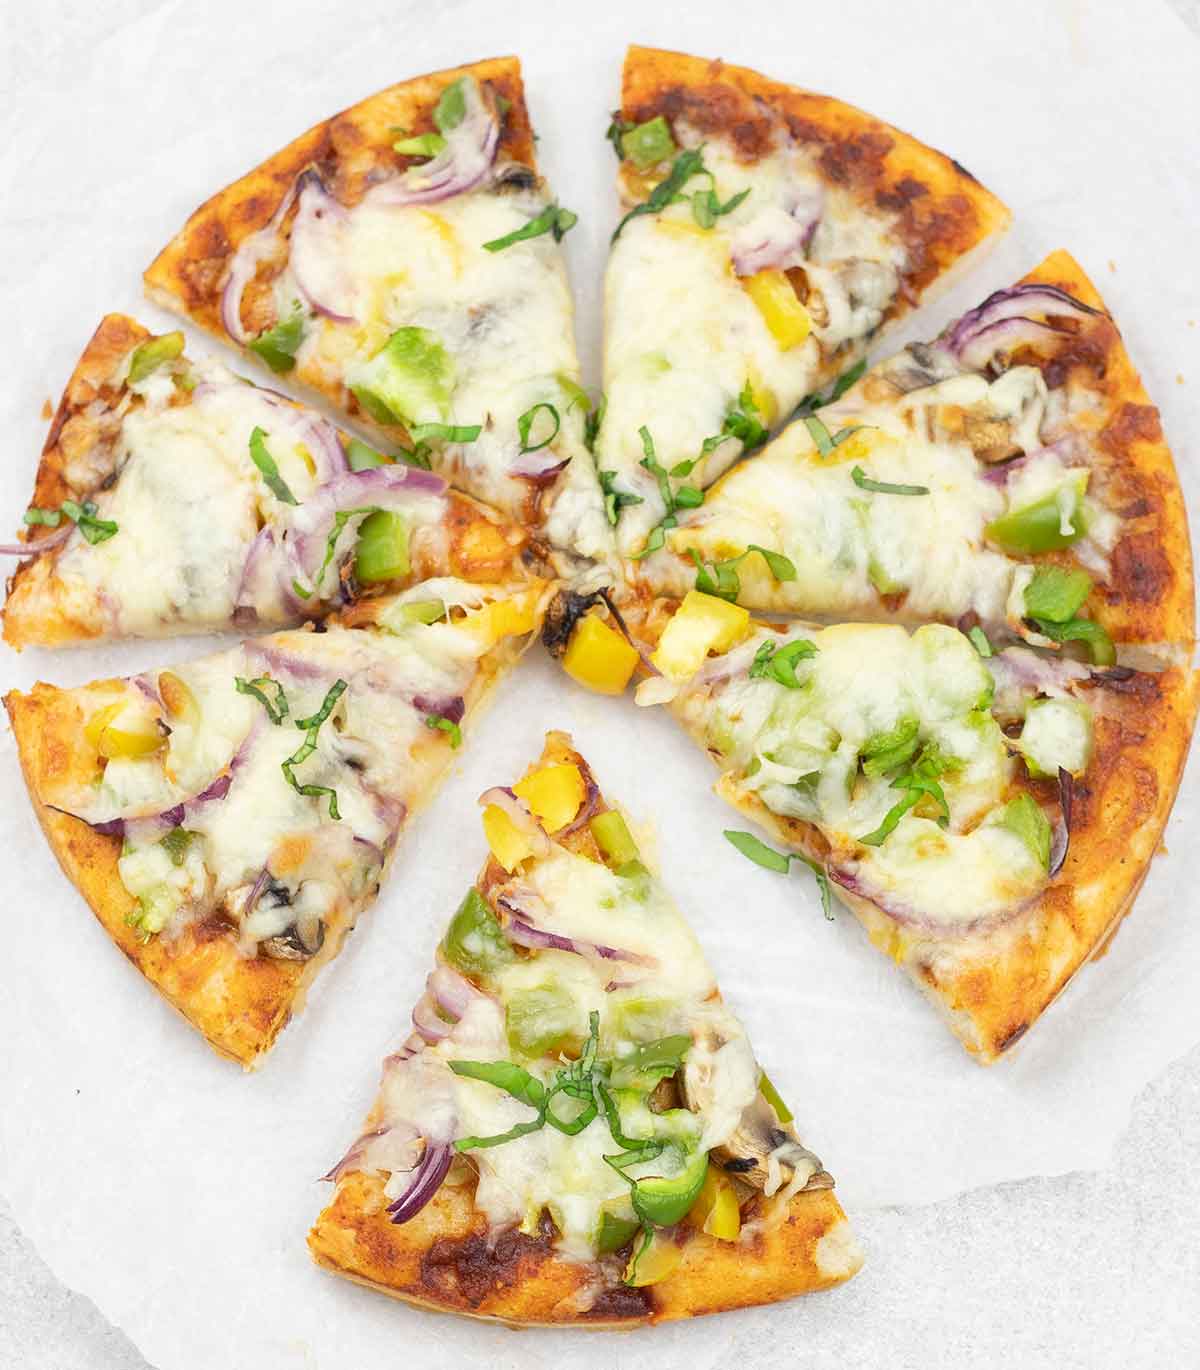 Thai curry pizza cut into slices.